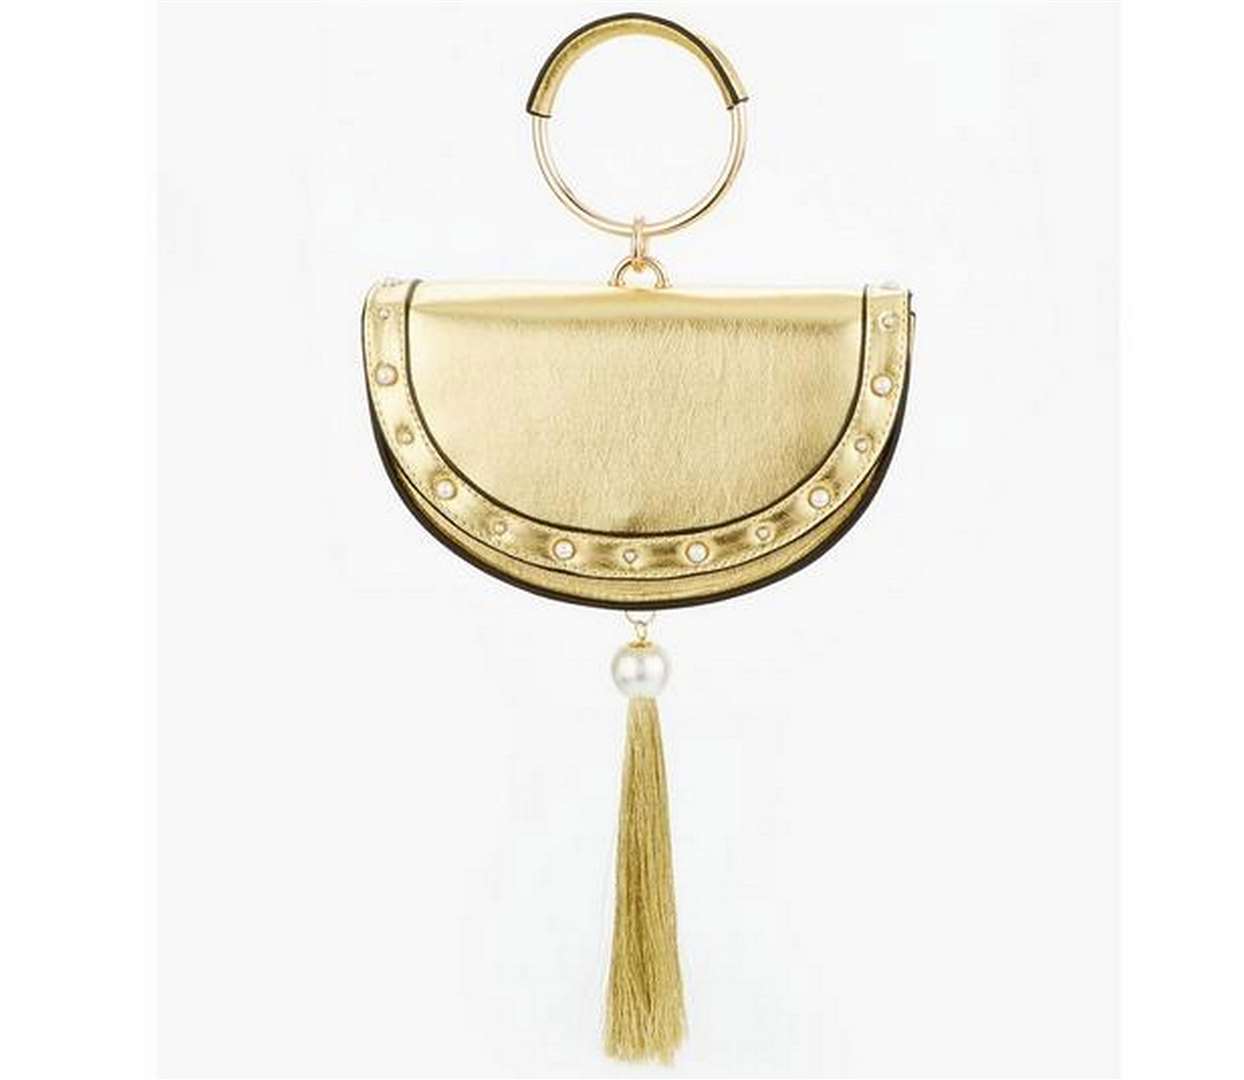 Half Moon Statement Tassle Wristlet Bag, £35, available from Very.co.uk.